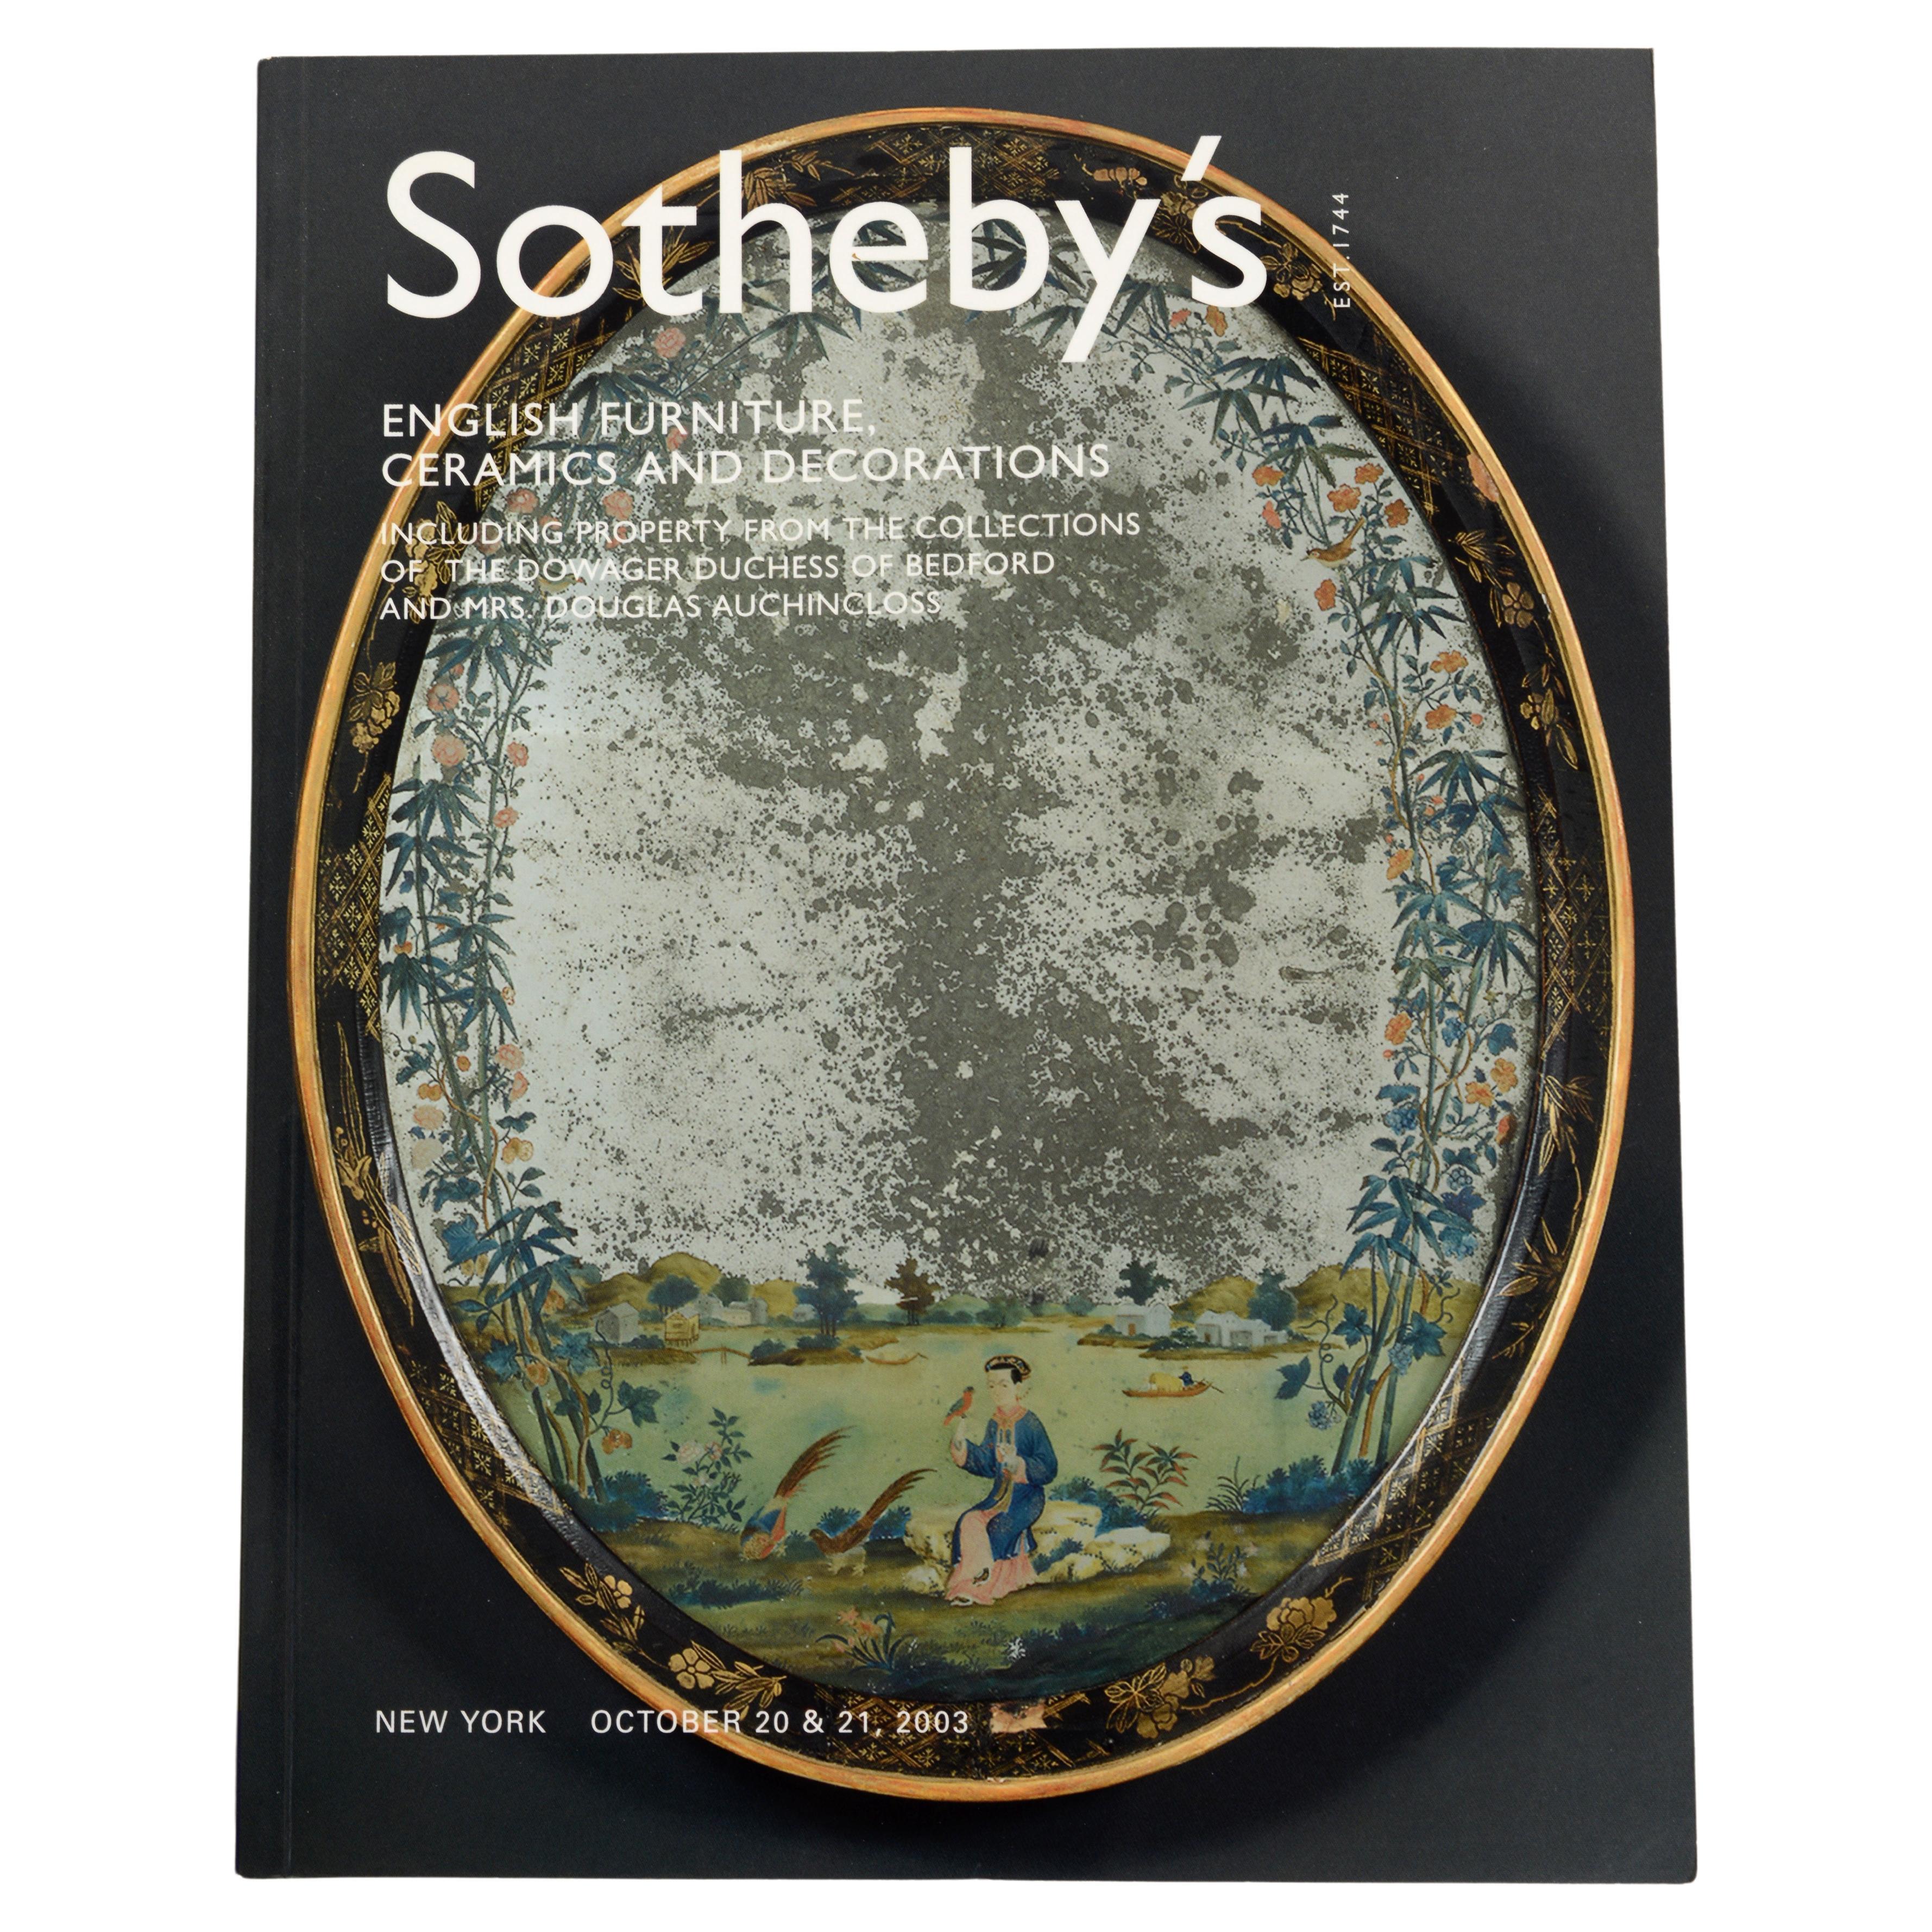 Sotheby's, English Furniture, Ceramics & Decorations: Collections Various Owners